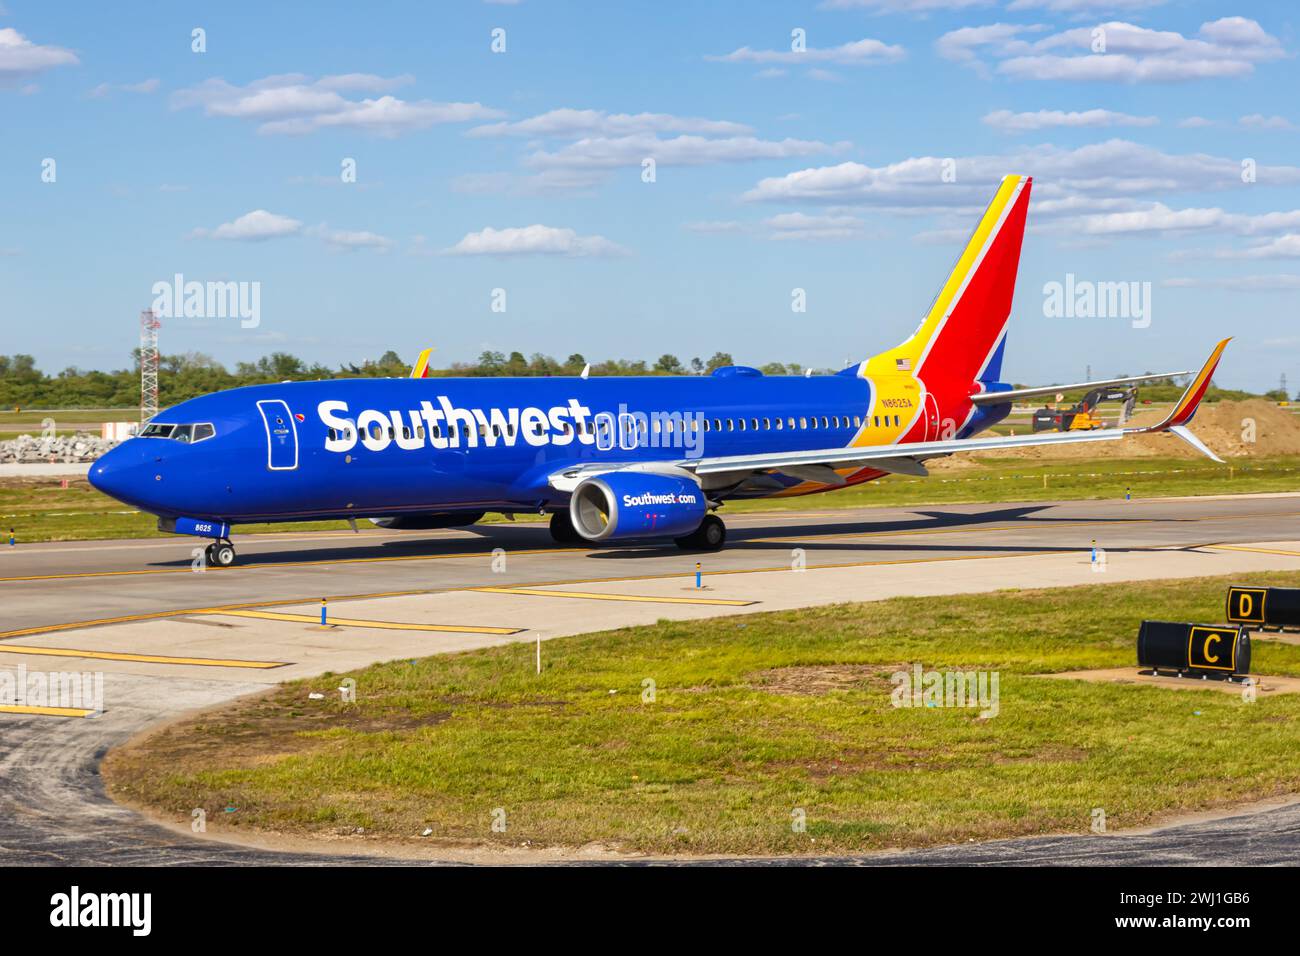 Southwest Boeing 737-800 aircraft St. Louis Lambert Airport in the USA Stock Photo